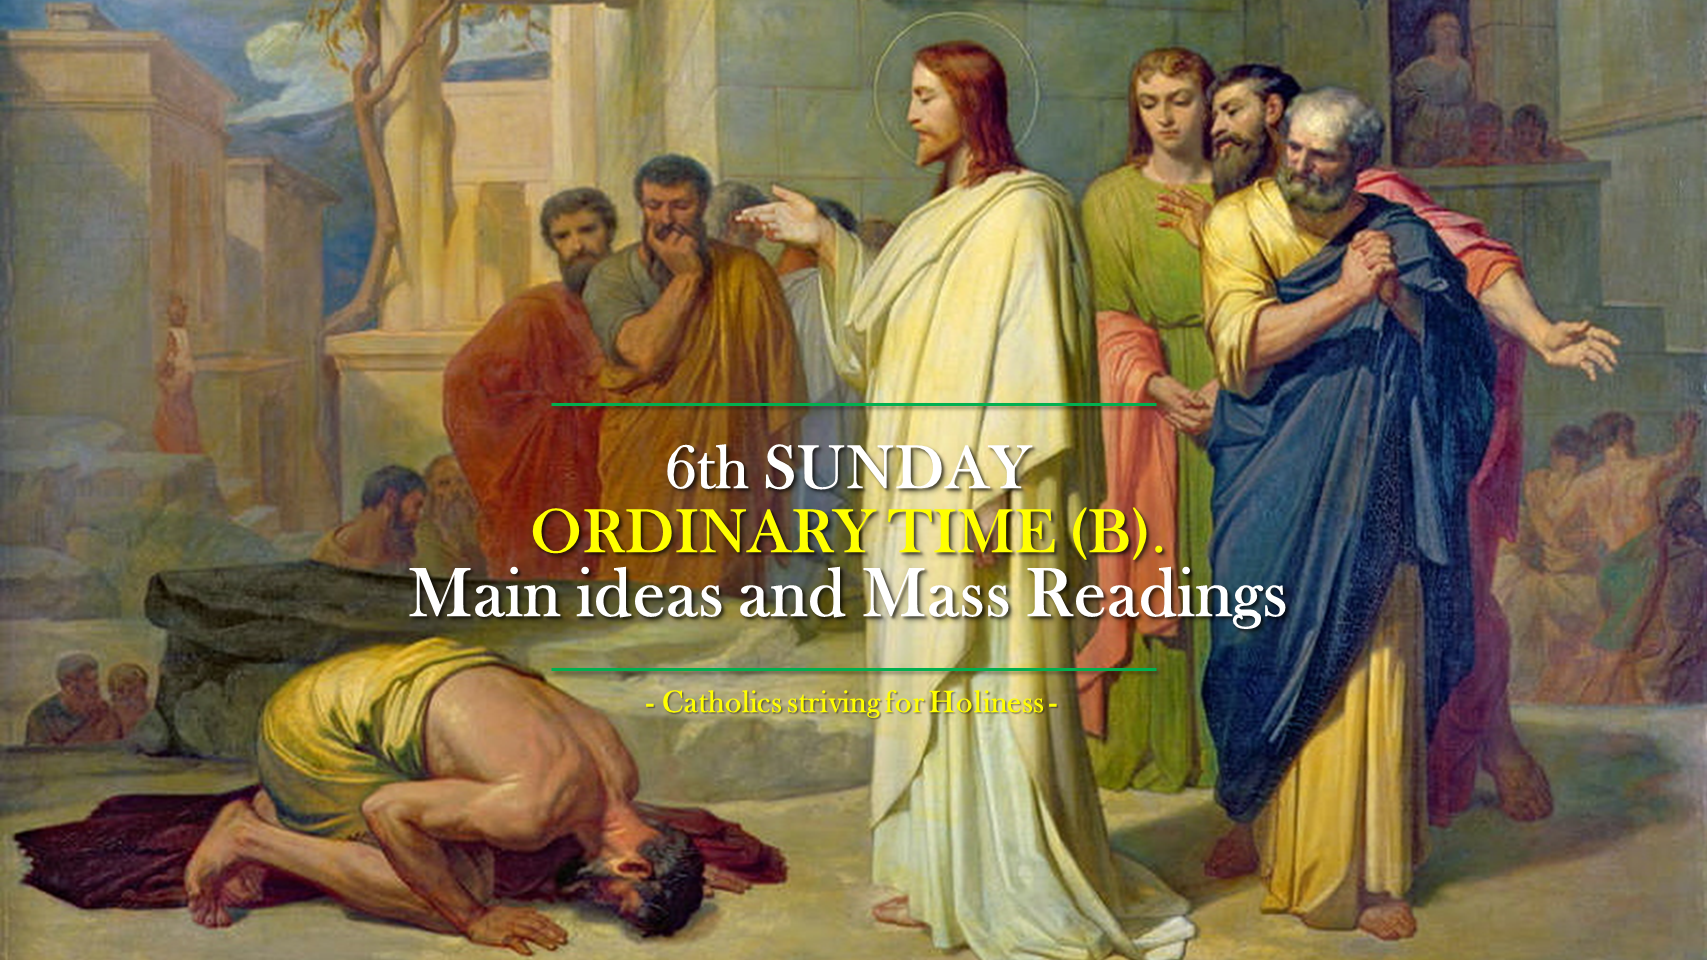 6th Sunday of Ordinary Time (B) MAIN IDEAS AND MASS READINGS. 3